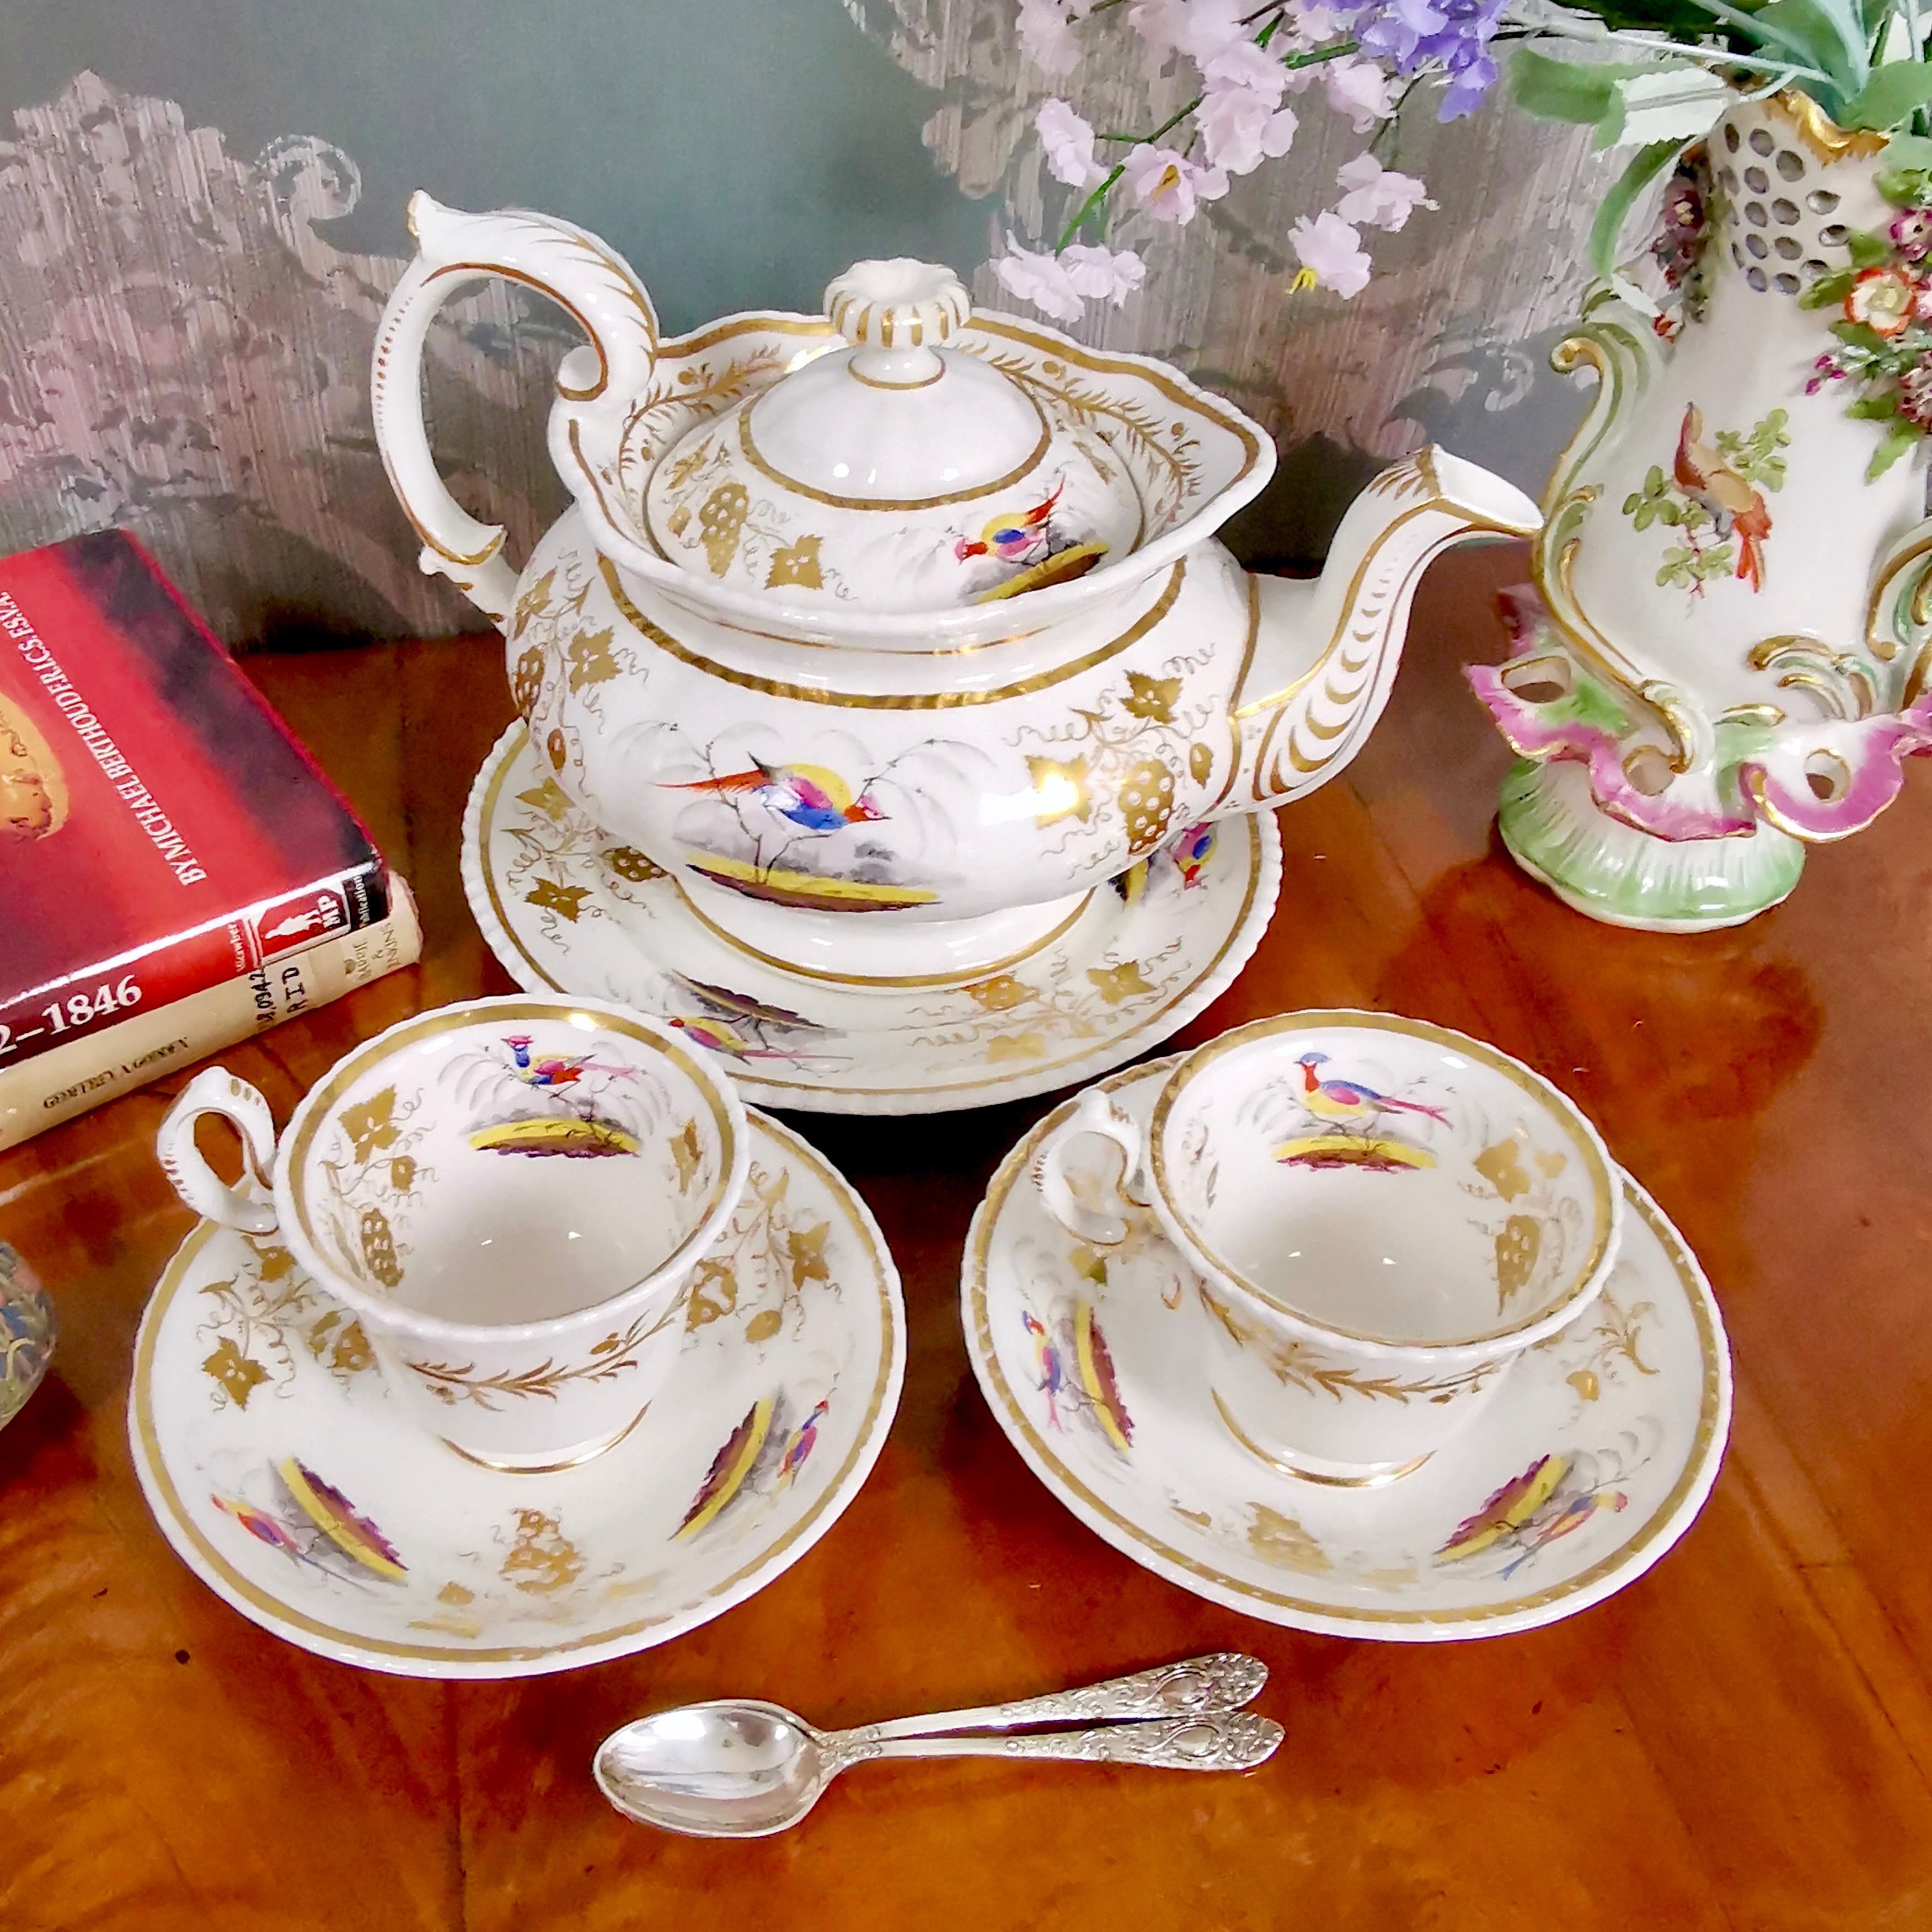 This is a tea set produced by Grainger Worcester in circa 1830, which was the Rococo Revival era. The set is decorated with birds and consists of a teapot, teapot stand or cake plate and two narrow cups and saucers. 

Grainger was one of the leading